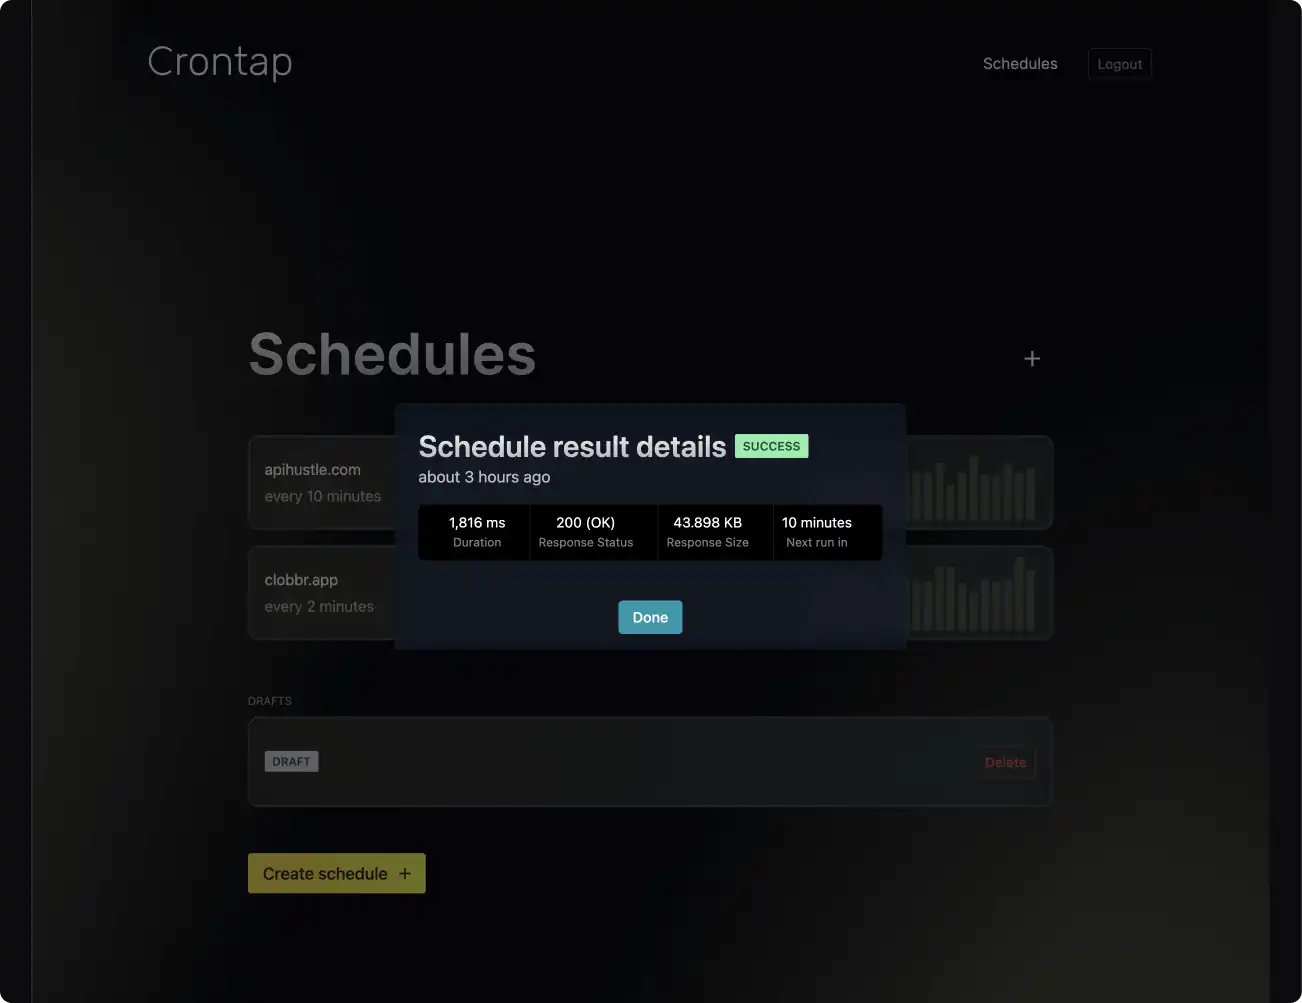 Screenshot of Crontap seeing historical success API calls for a schedule